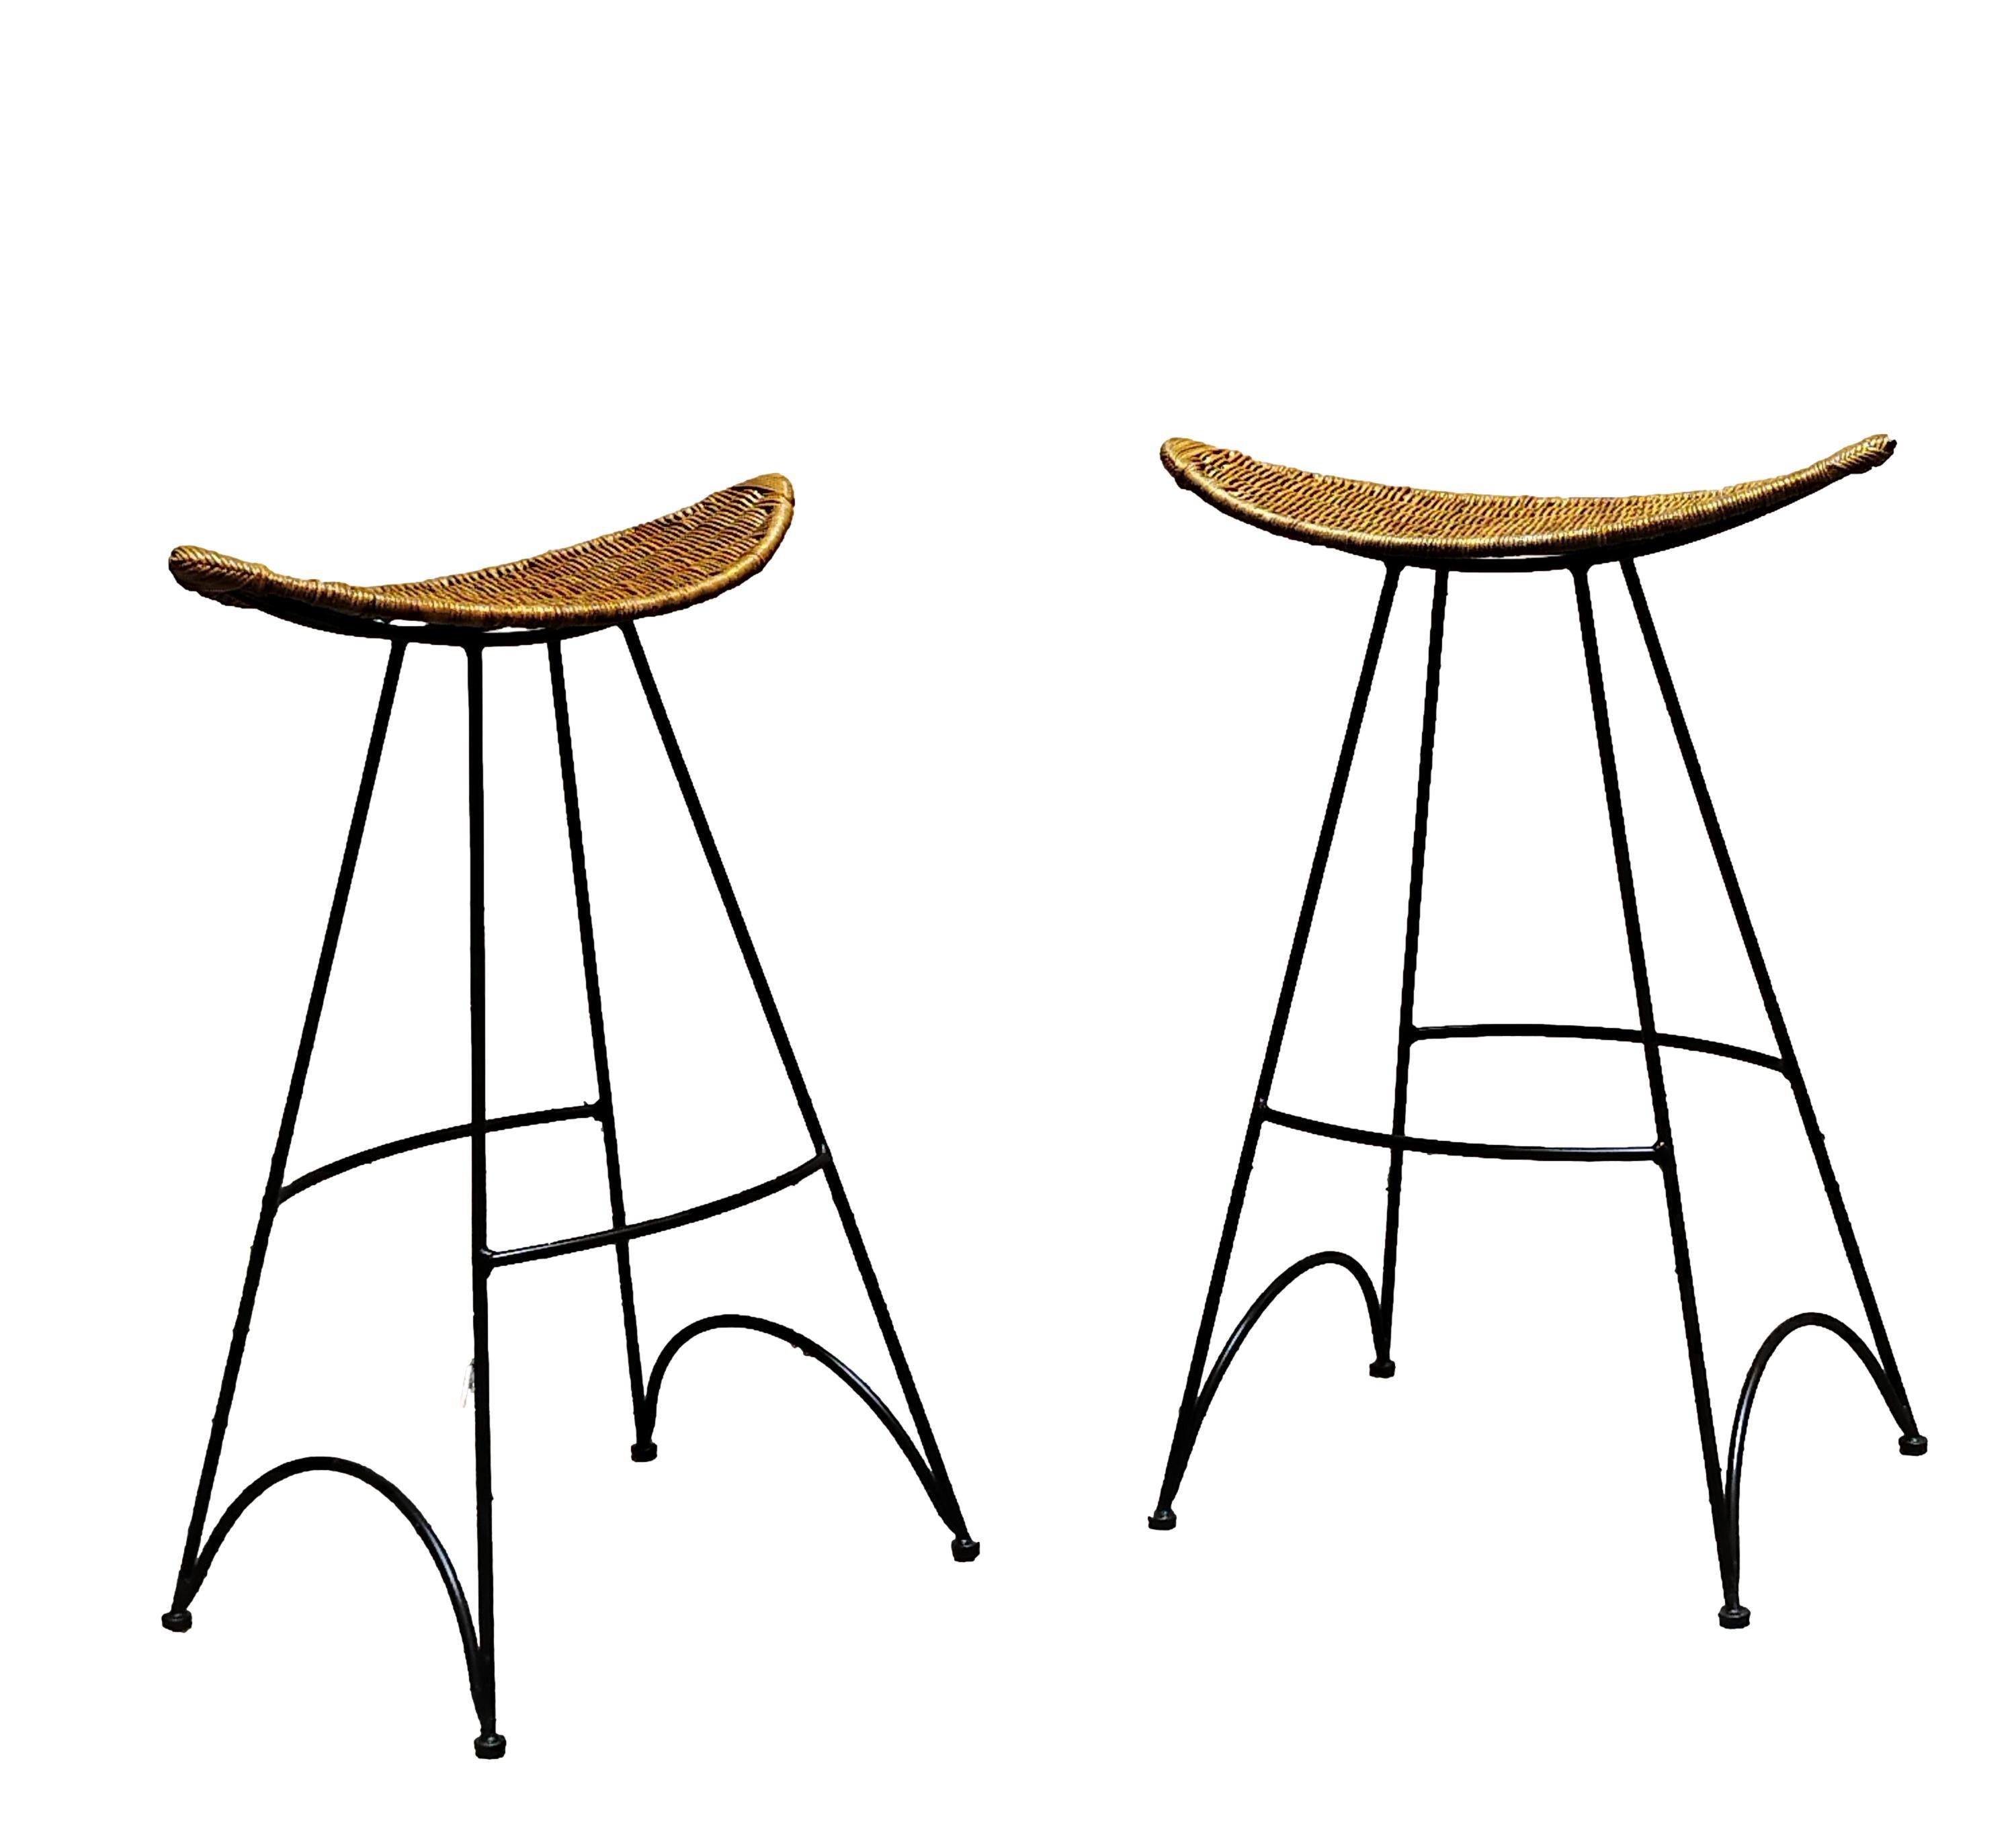 Pair of stools from the 